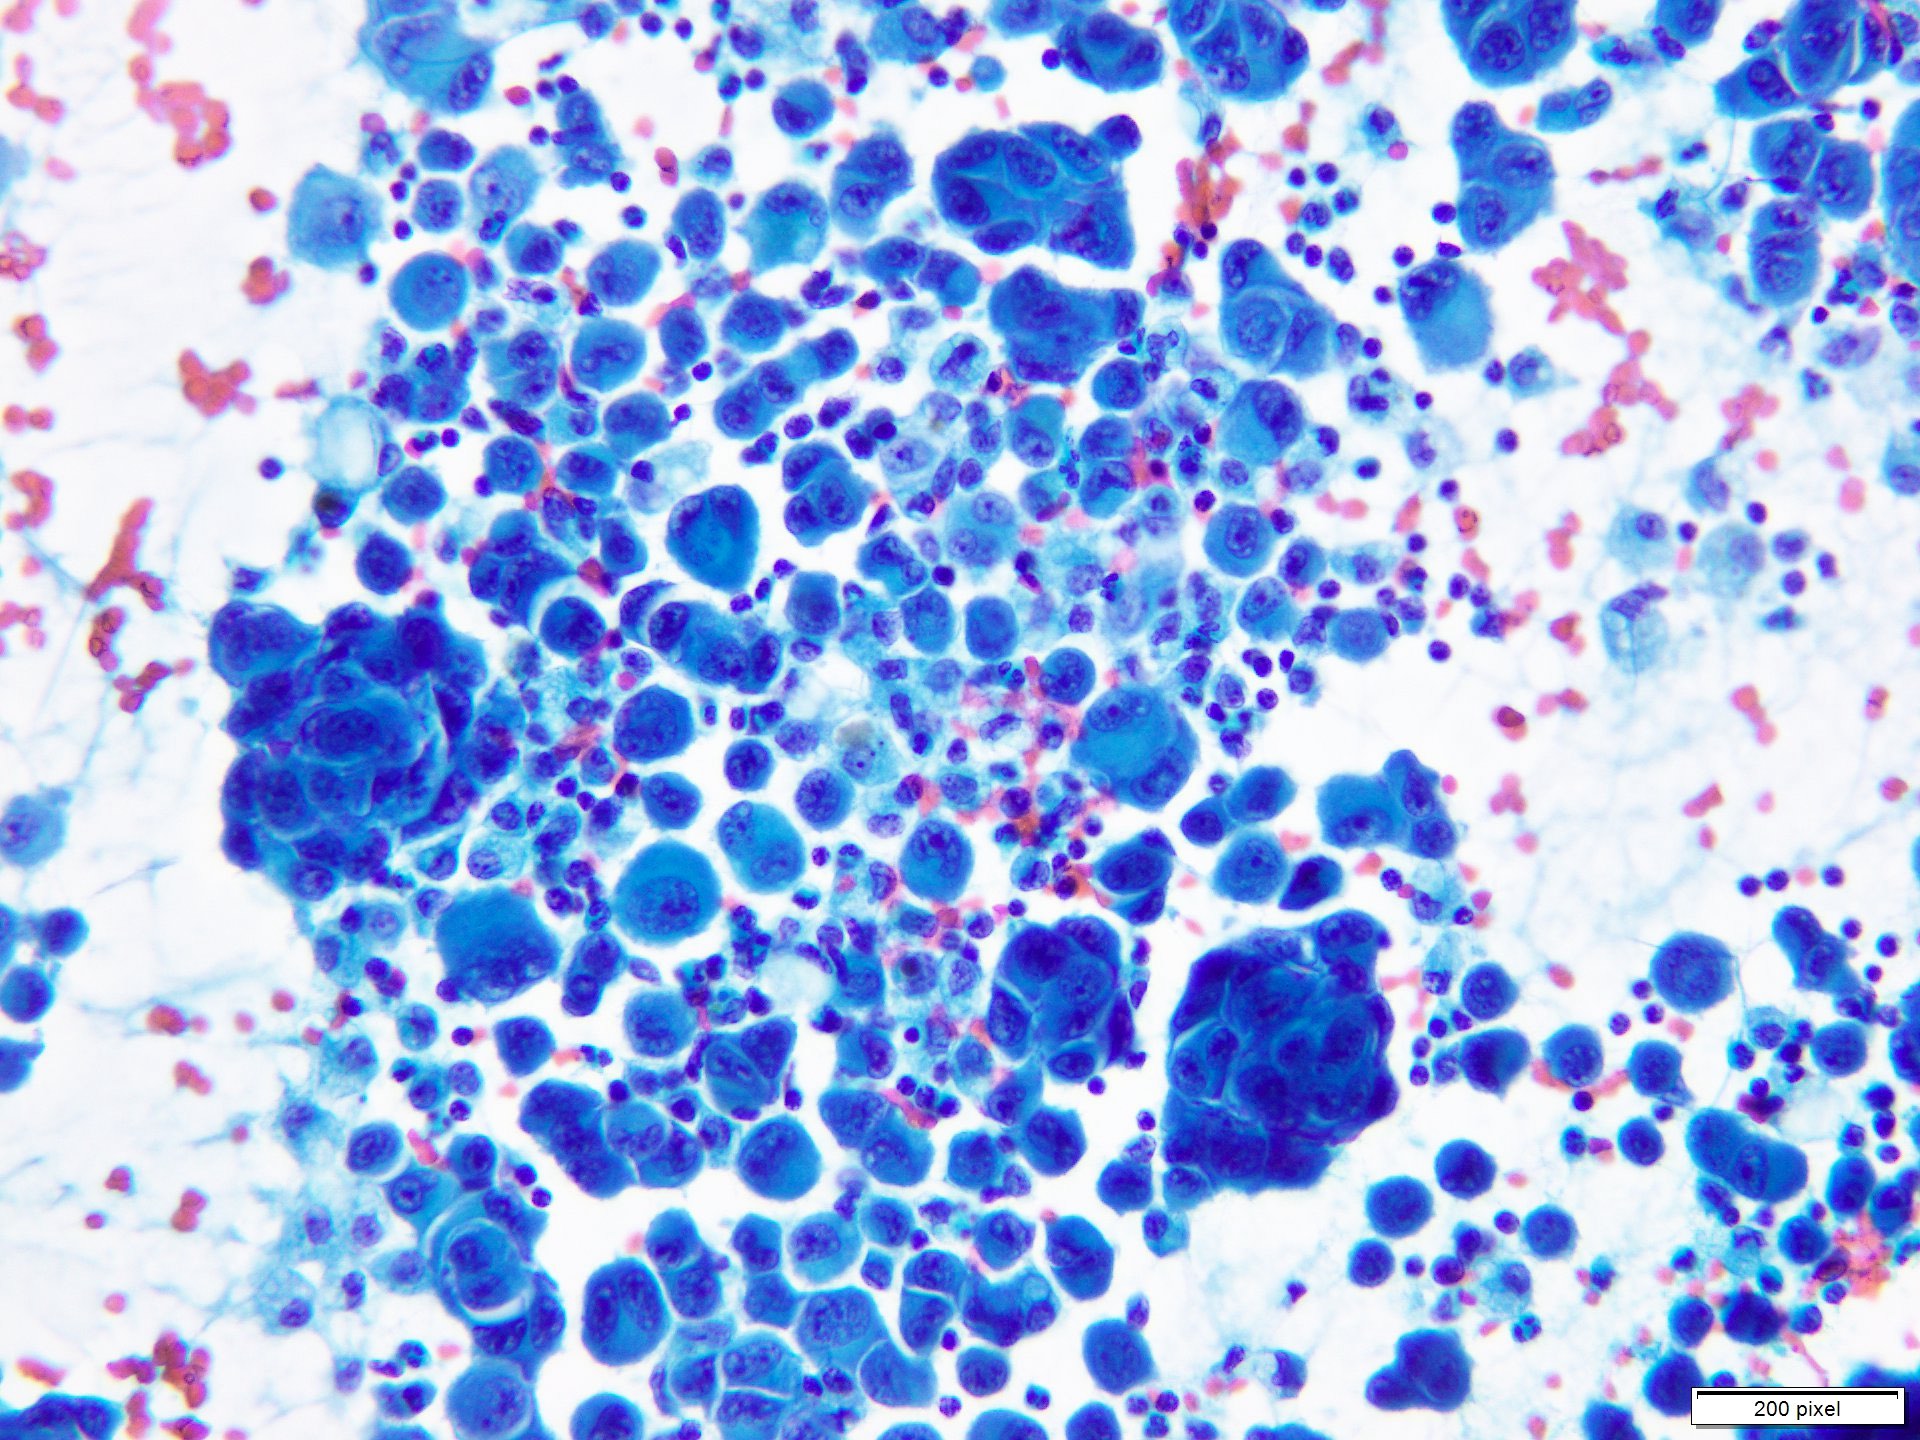 Papanicolaou stained smear